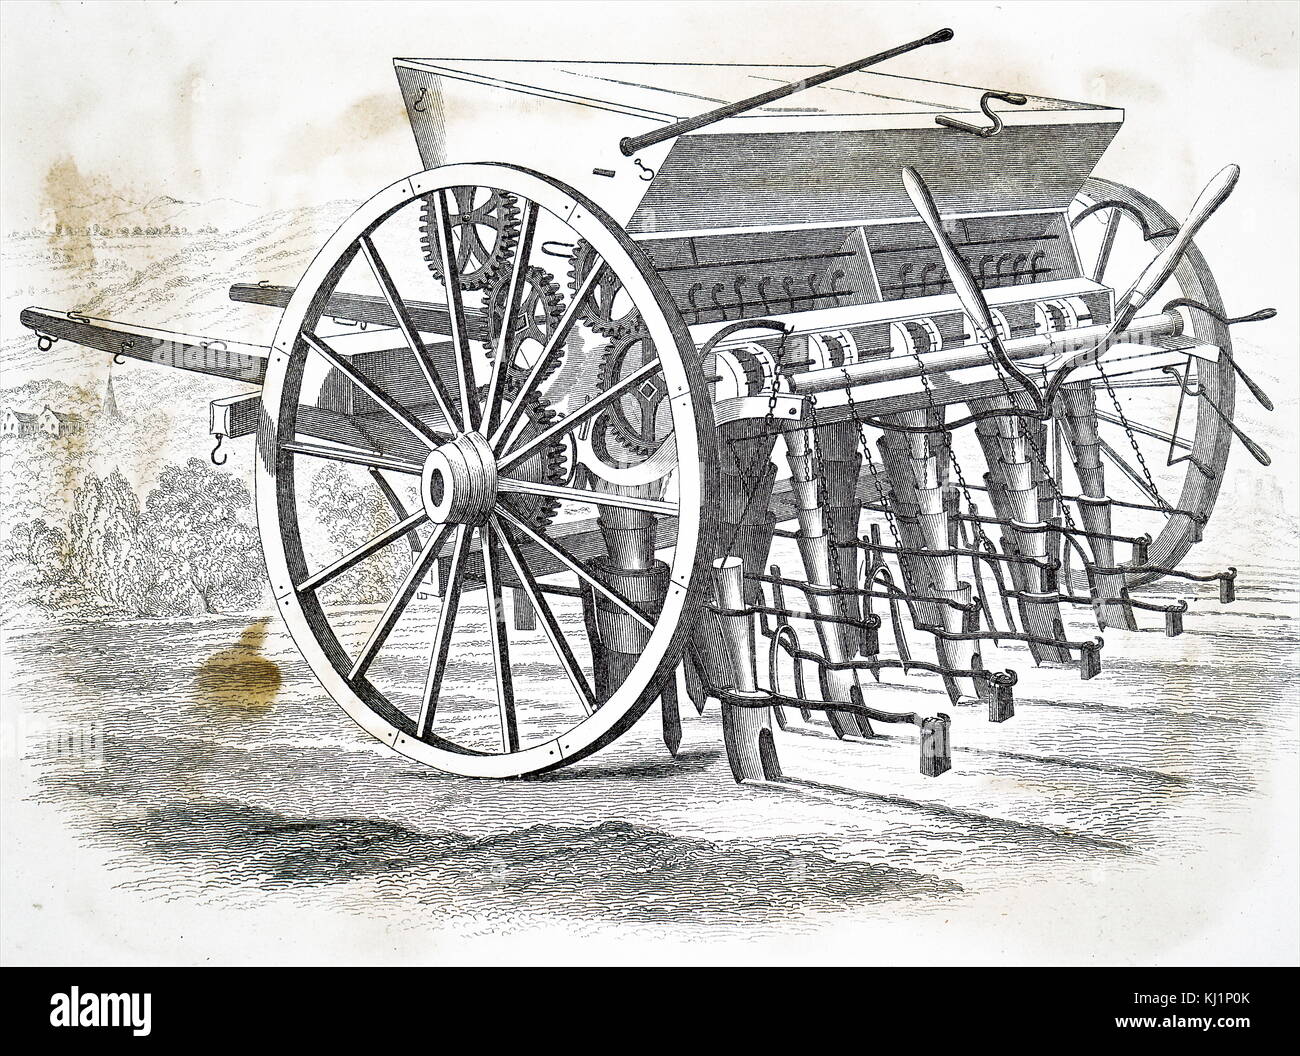 Engraving depicting Garrett's seed drill for sowing turnips and distributing bone meal at the same time. Dated 19th Century Stock Photo